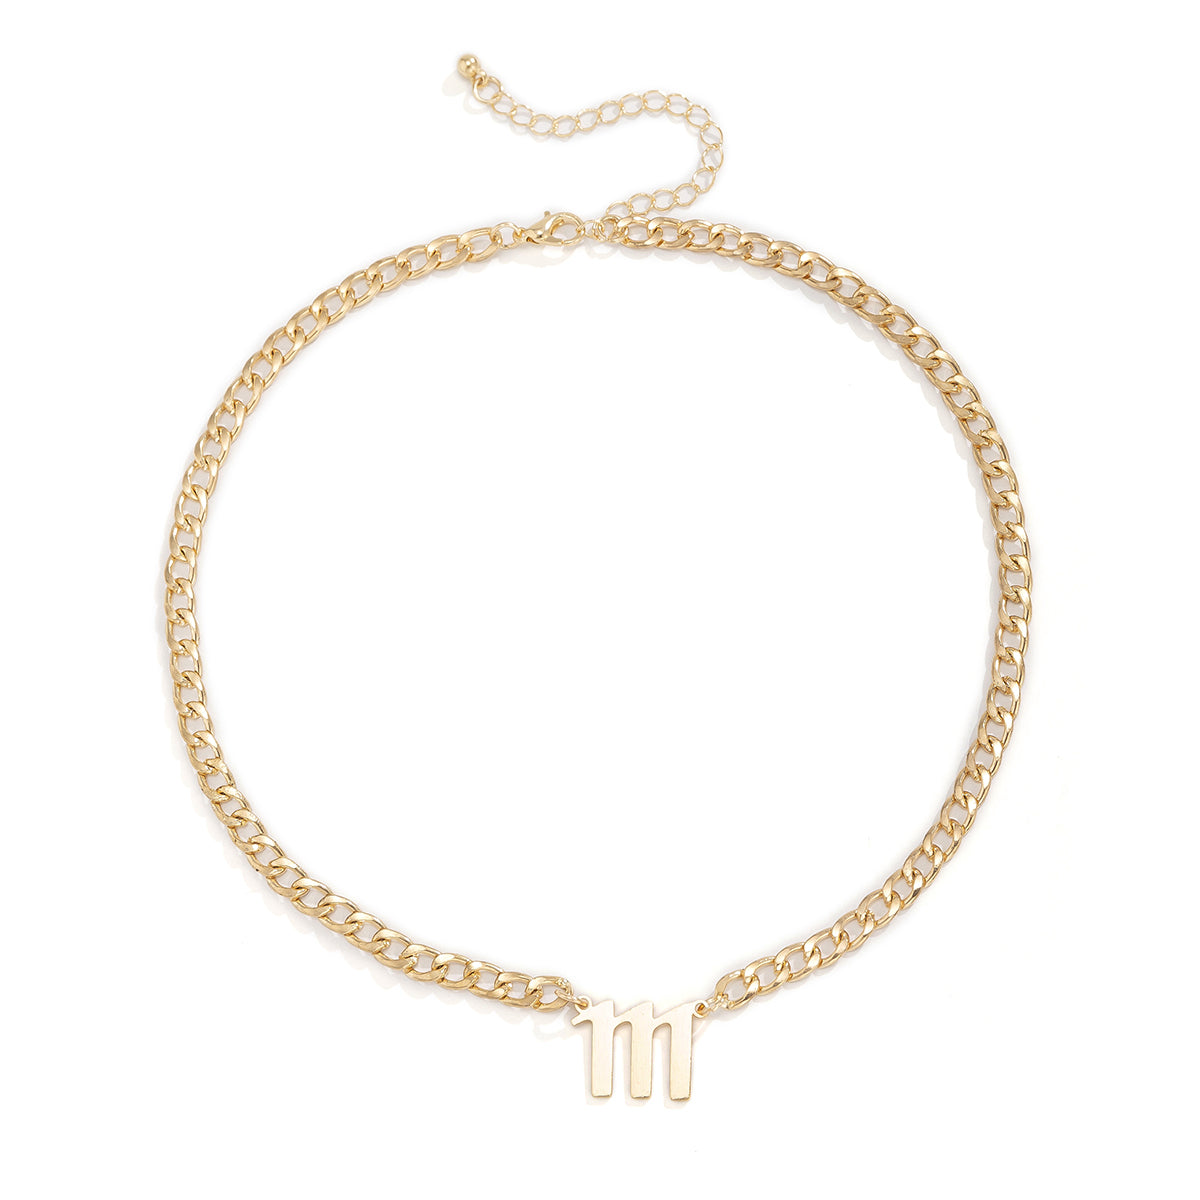 18K Gold-Plated '111' Curb Chain Pendant Necklace